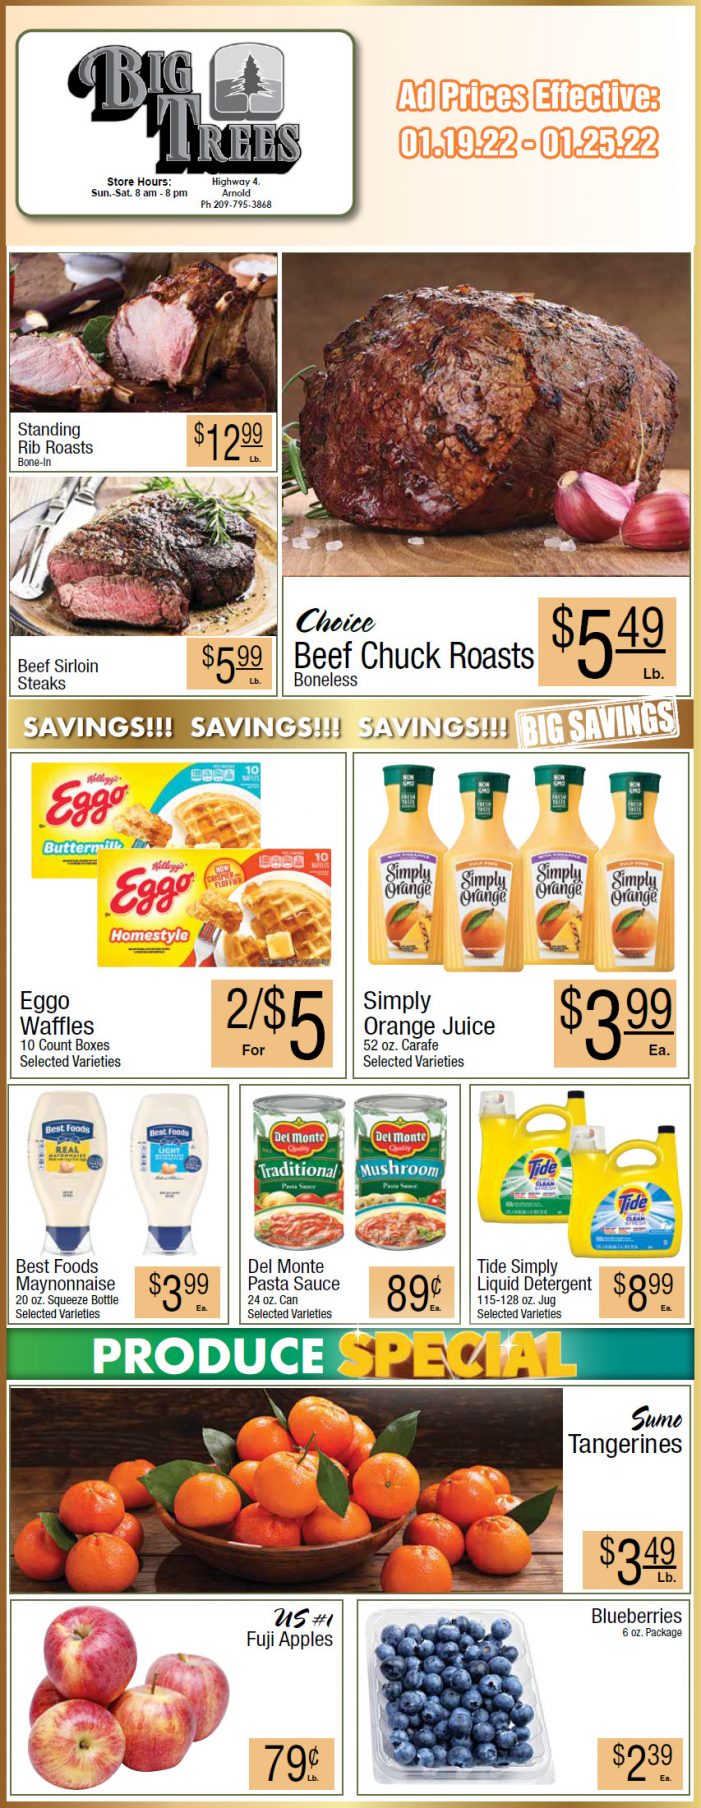 Big Trees Market Weekly Ad & Grocery Specials Through January 25th! Shop Local & Save!